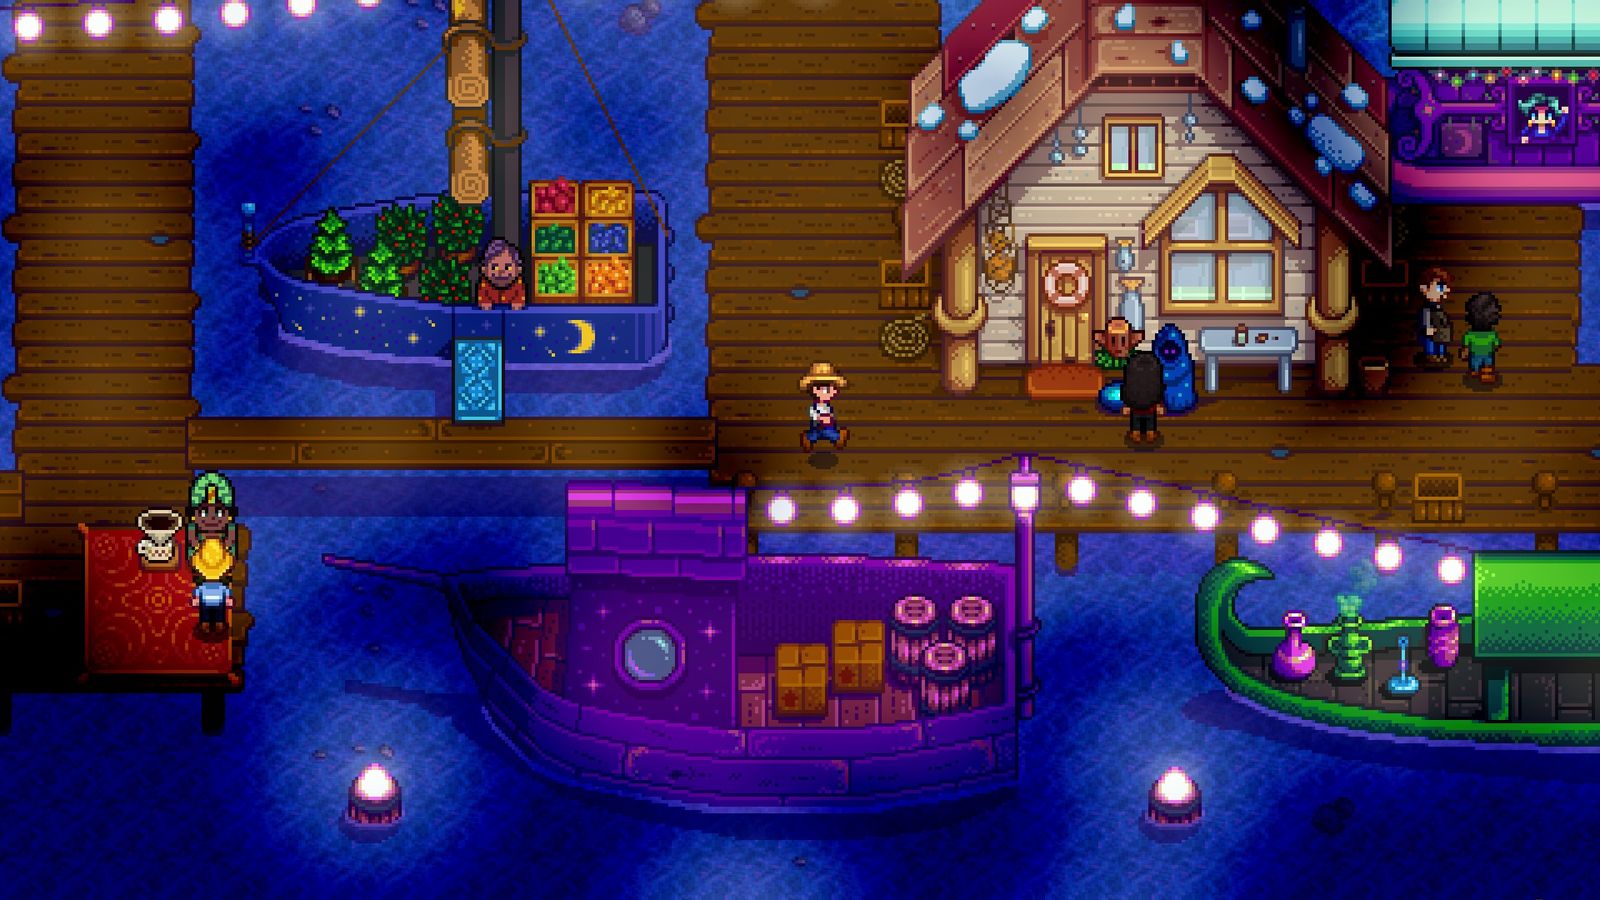 A player at the Nightmarket in Stardew Valley.